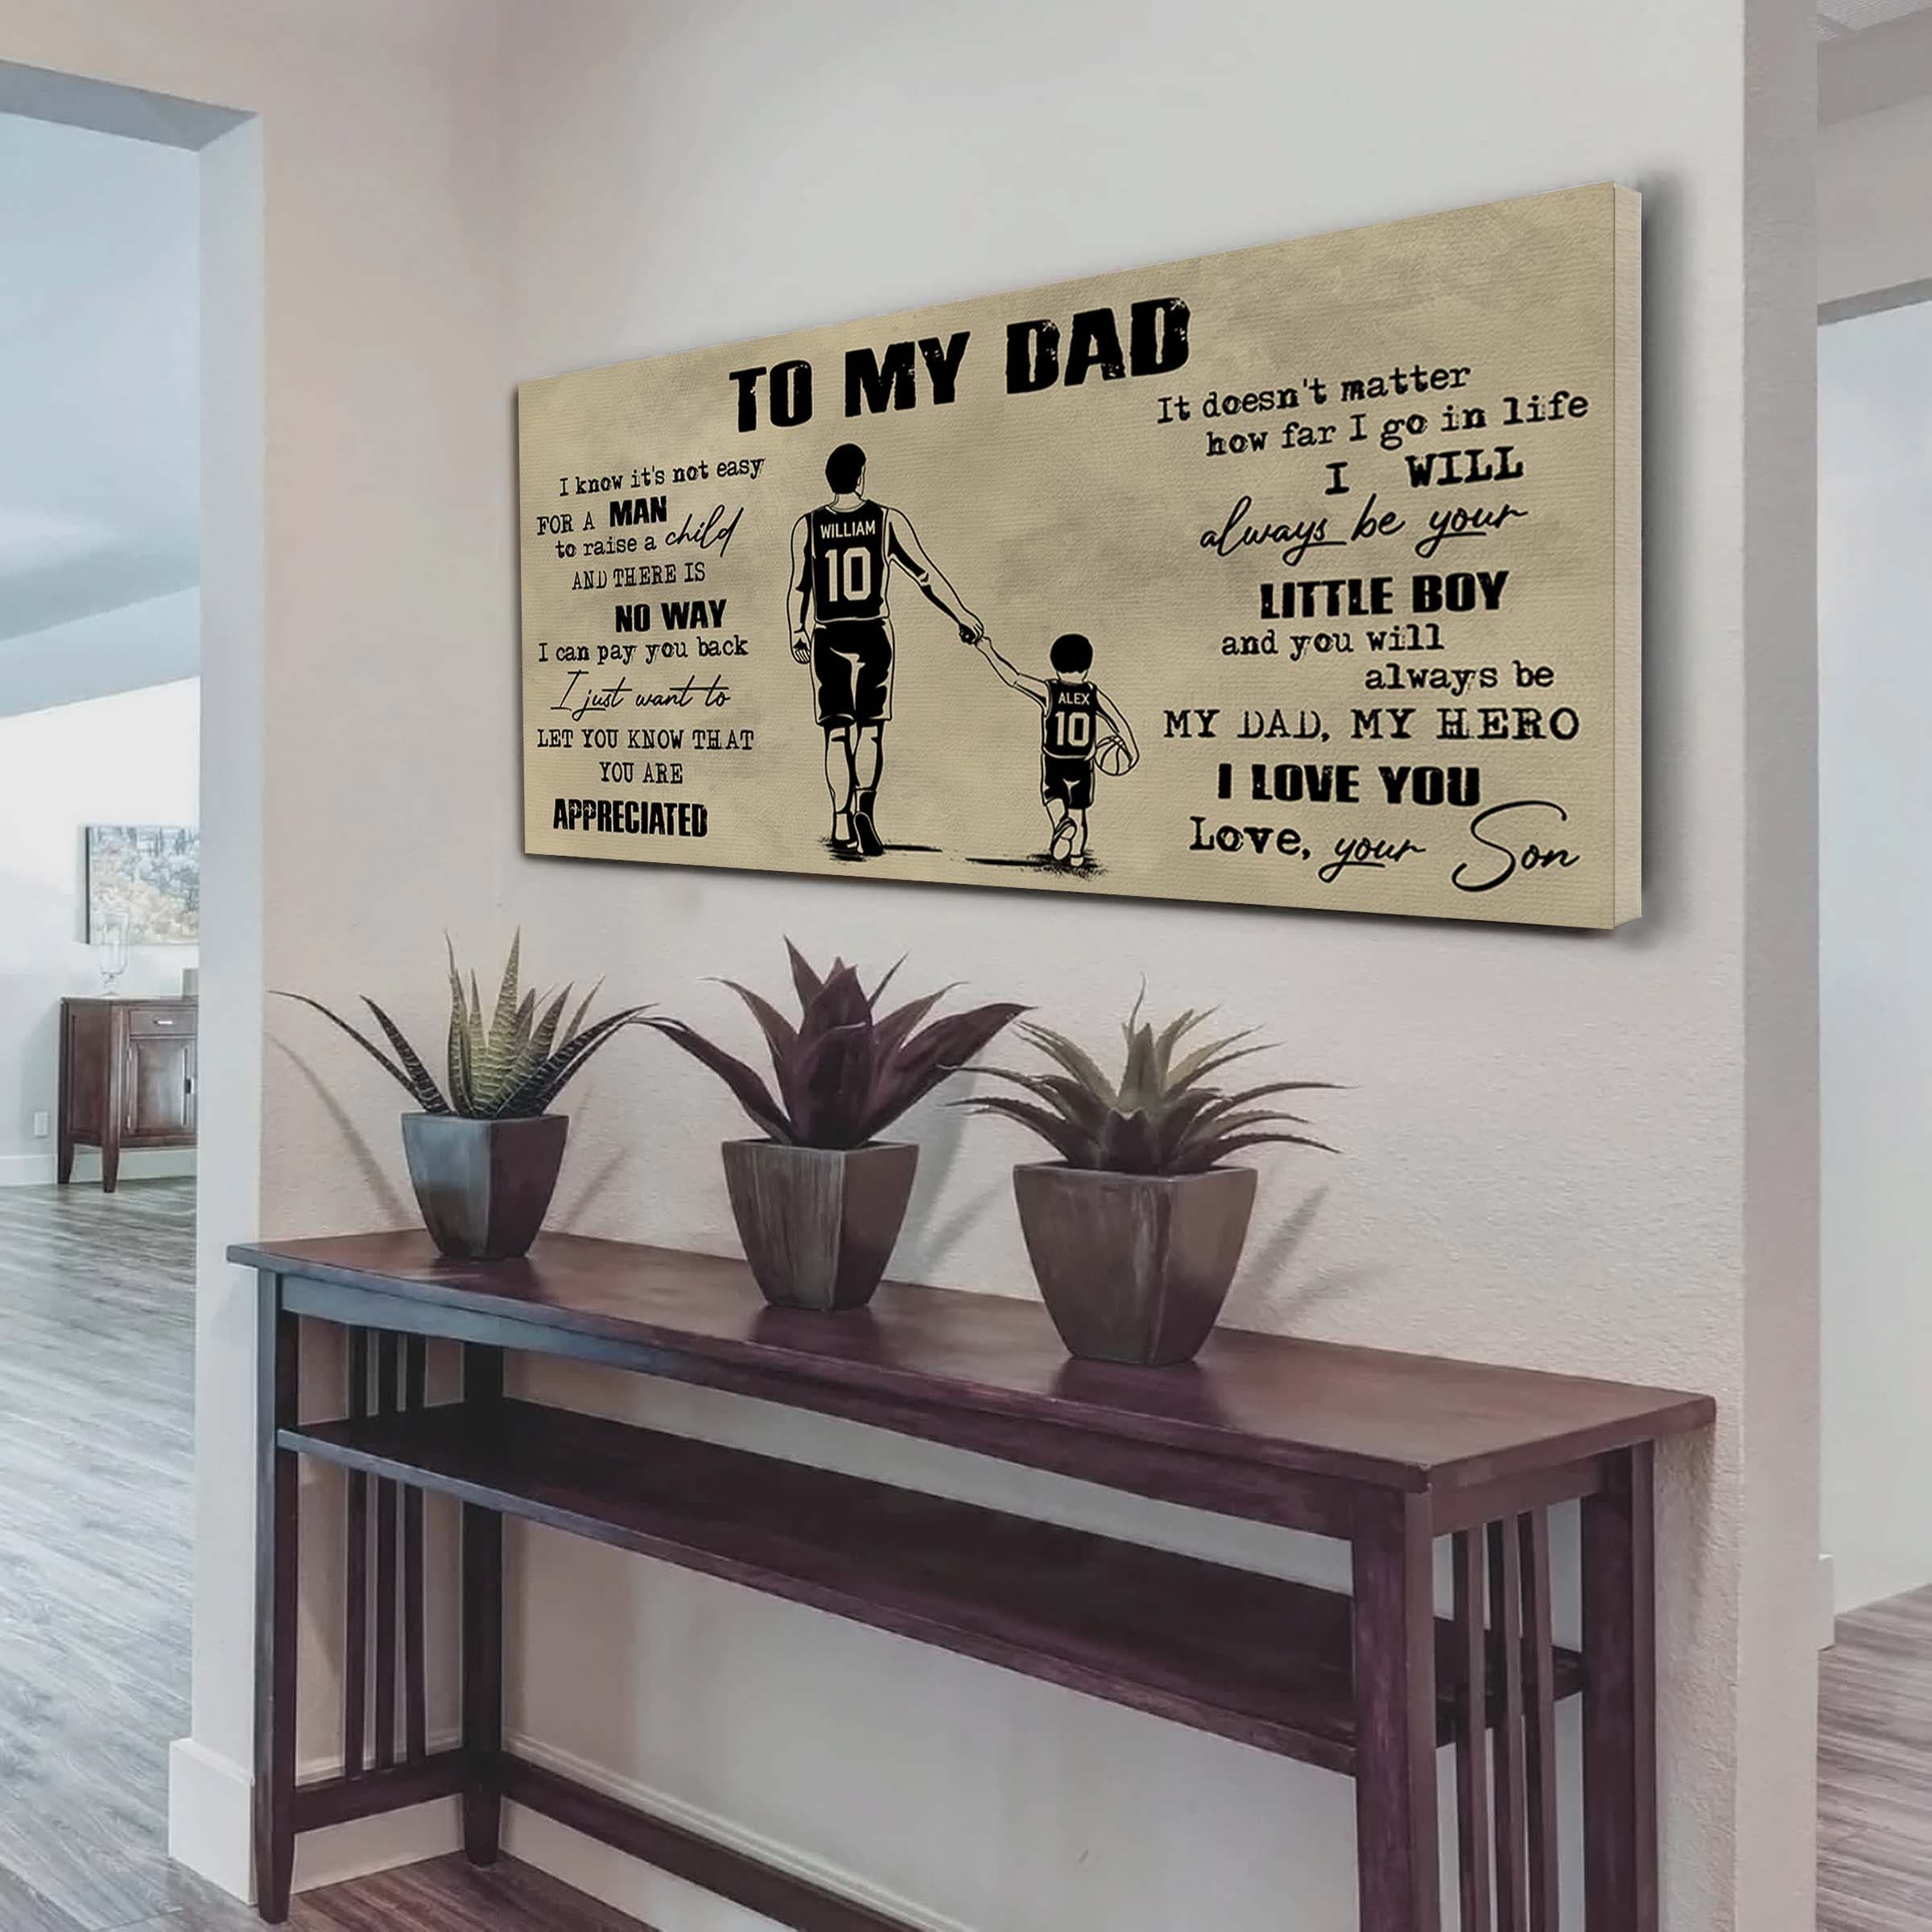 Family To My Dad I Know It Not Easy For A Man To Raise A Child - I Will Always Be Your Little Boy Poster Canvas Gift From Son